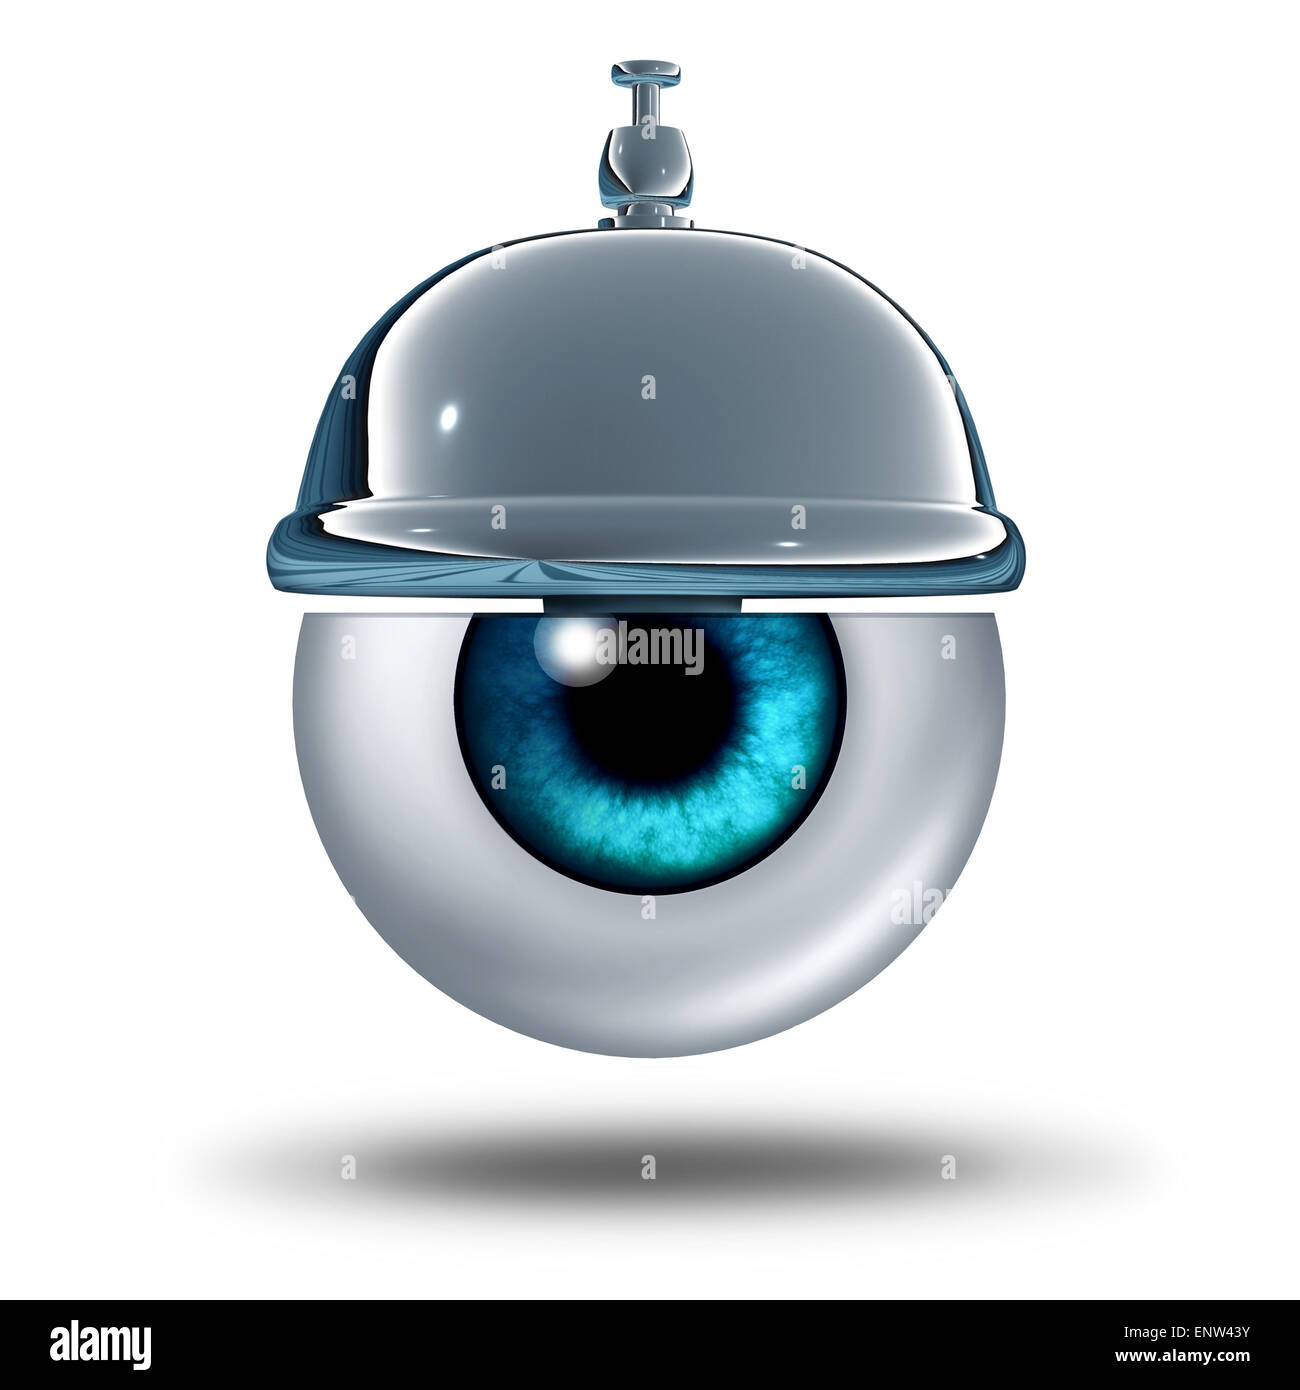 Eye health service concept as a human vision organ with a service bell as a healthcare metaphor and diagnosis symbol for a vision test or eyesight problems help from an apthalmologist or optometrist medical professional services. Stock Photo